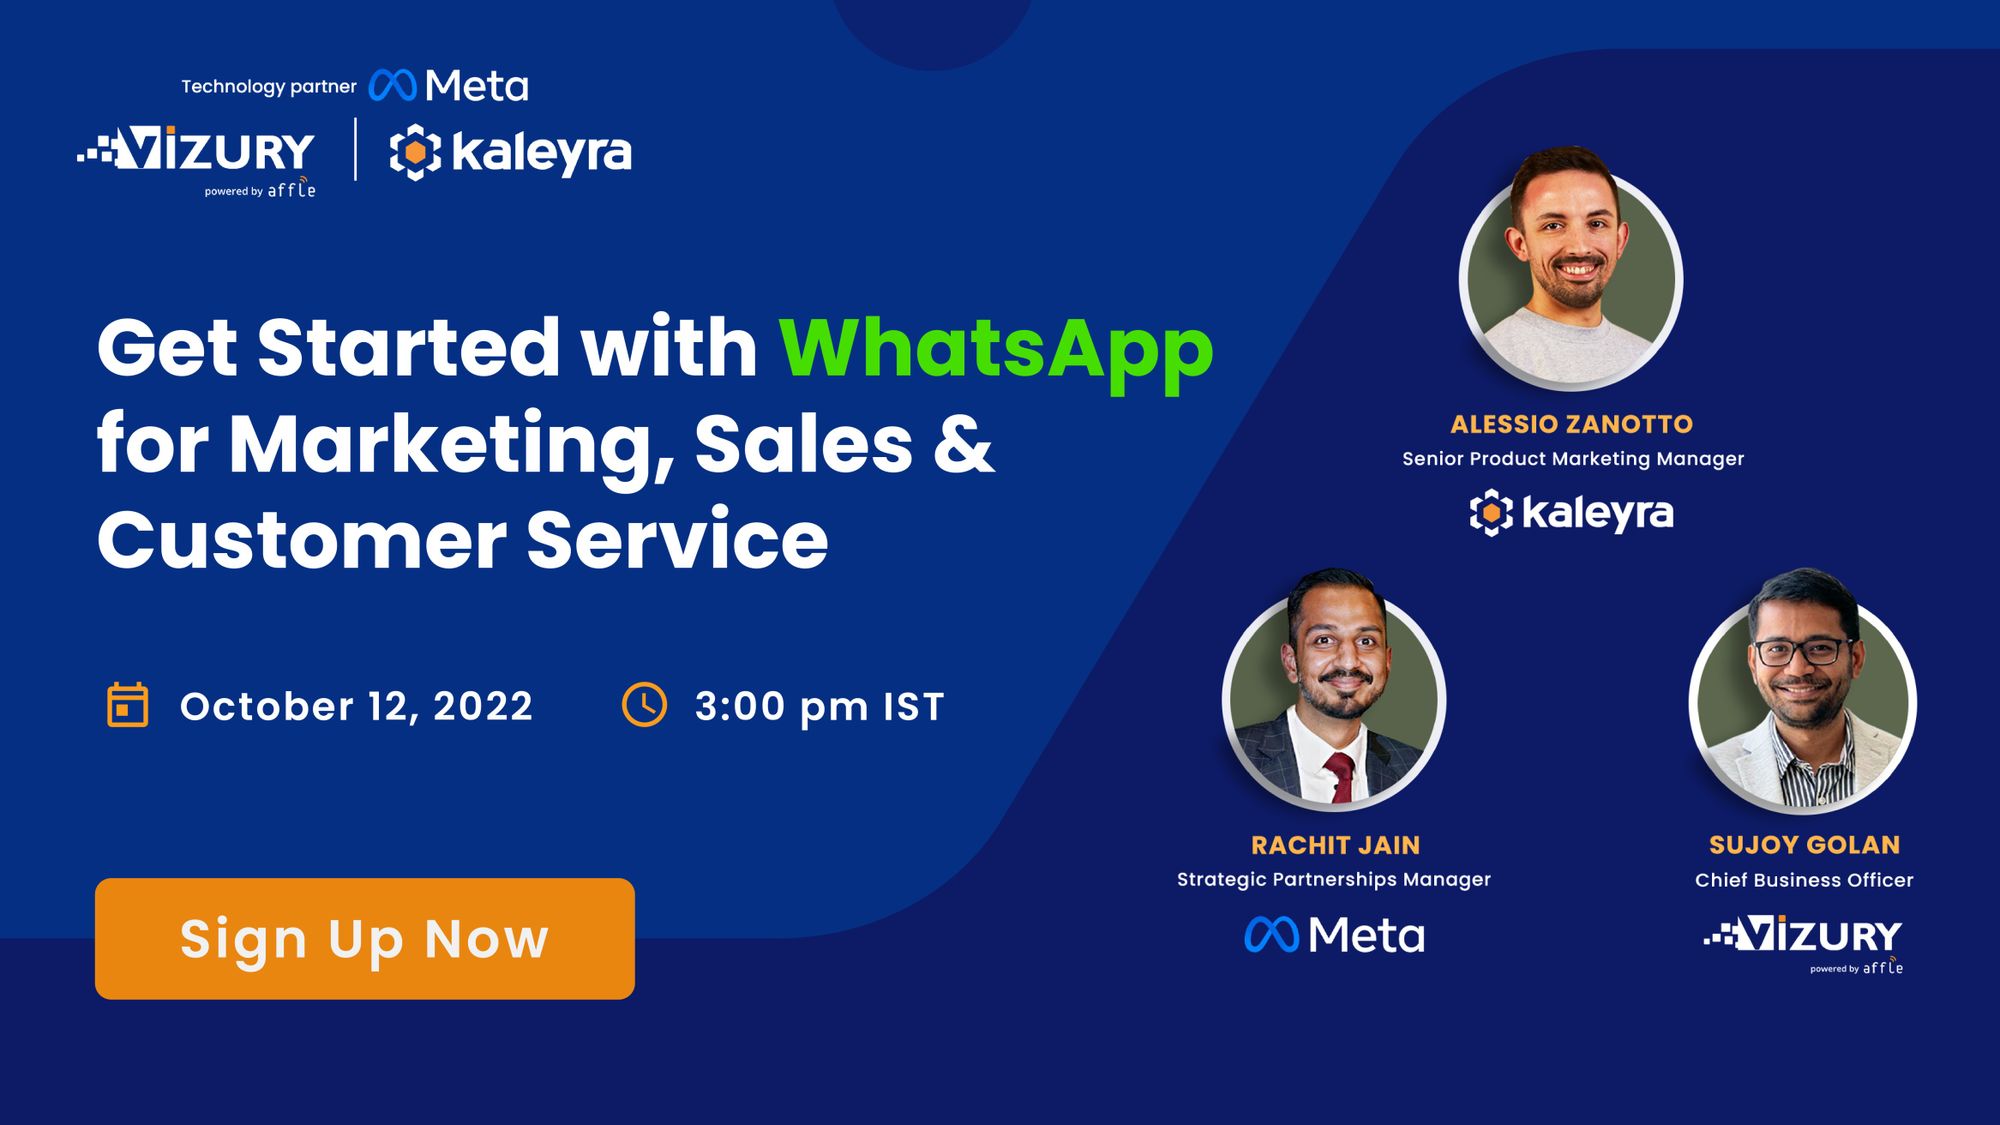 Getting Started with WhatsApp for Marketing, Sales & Marketing